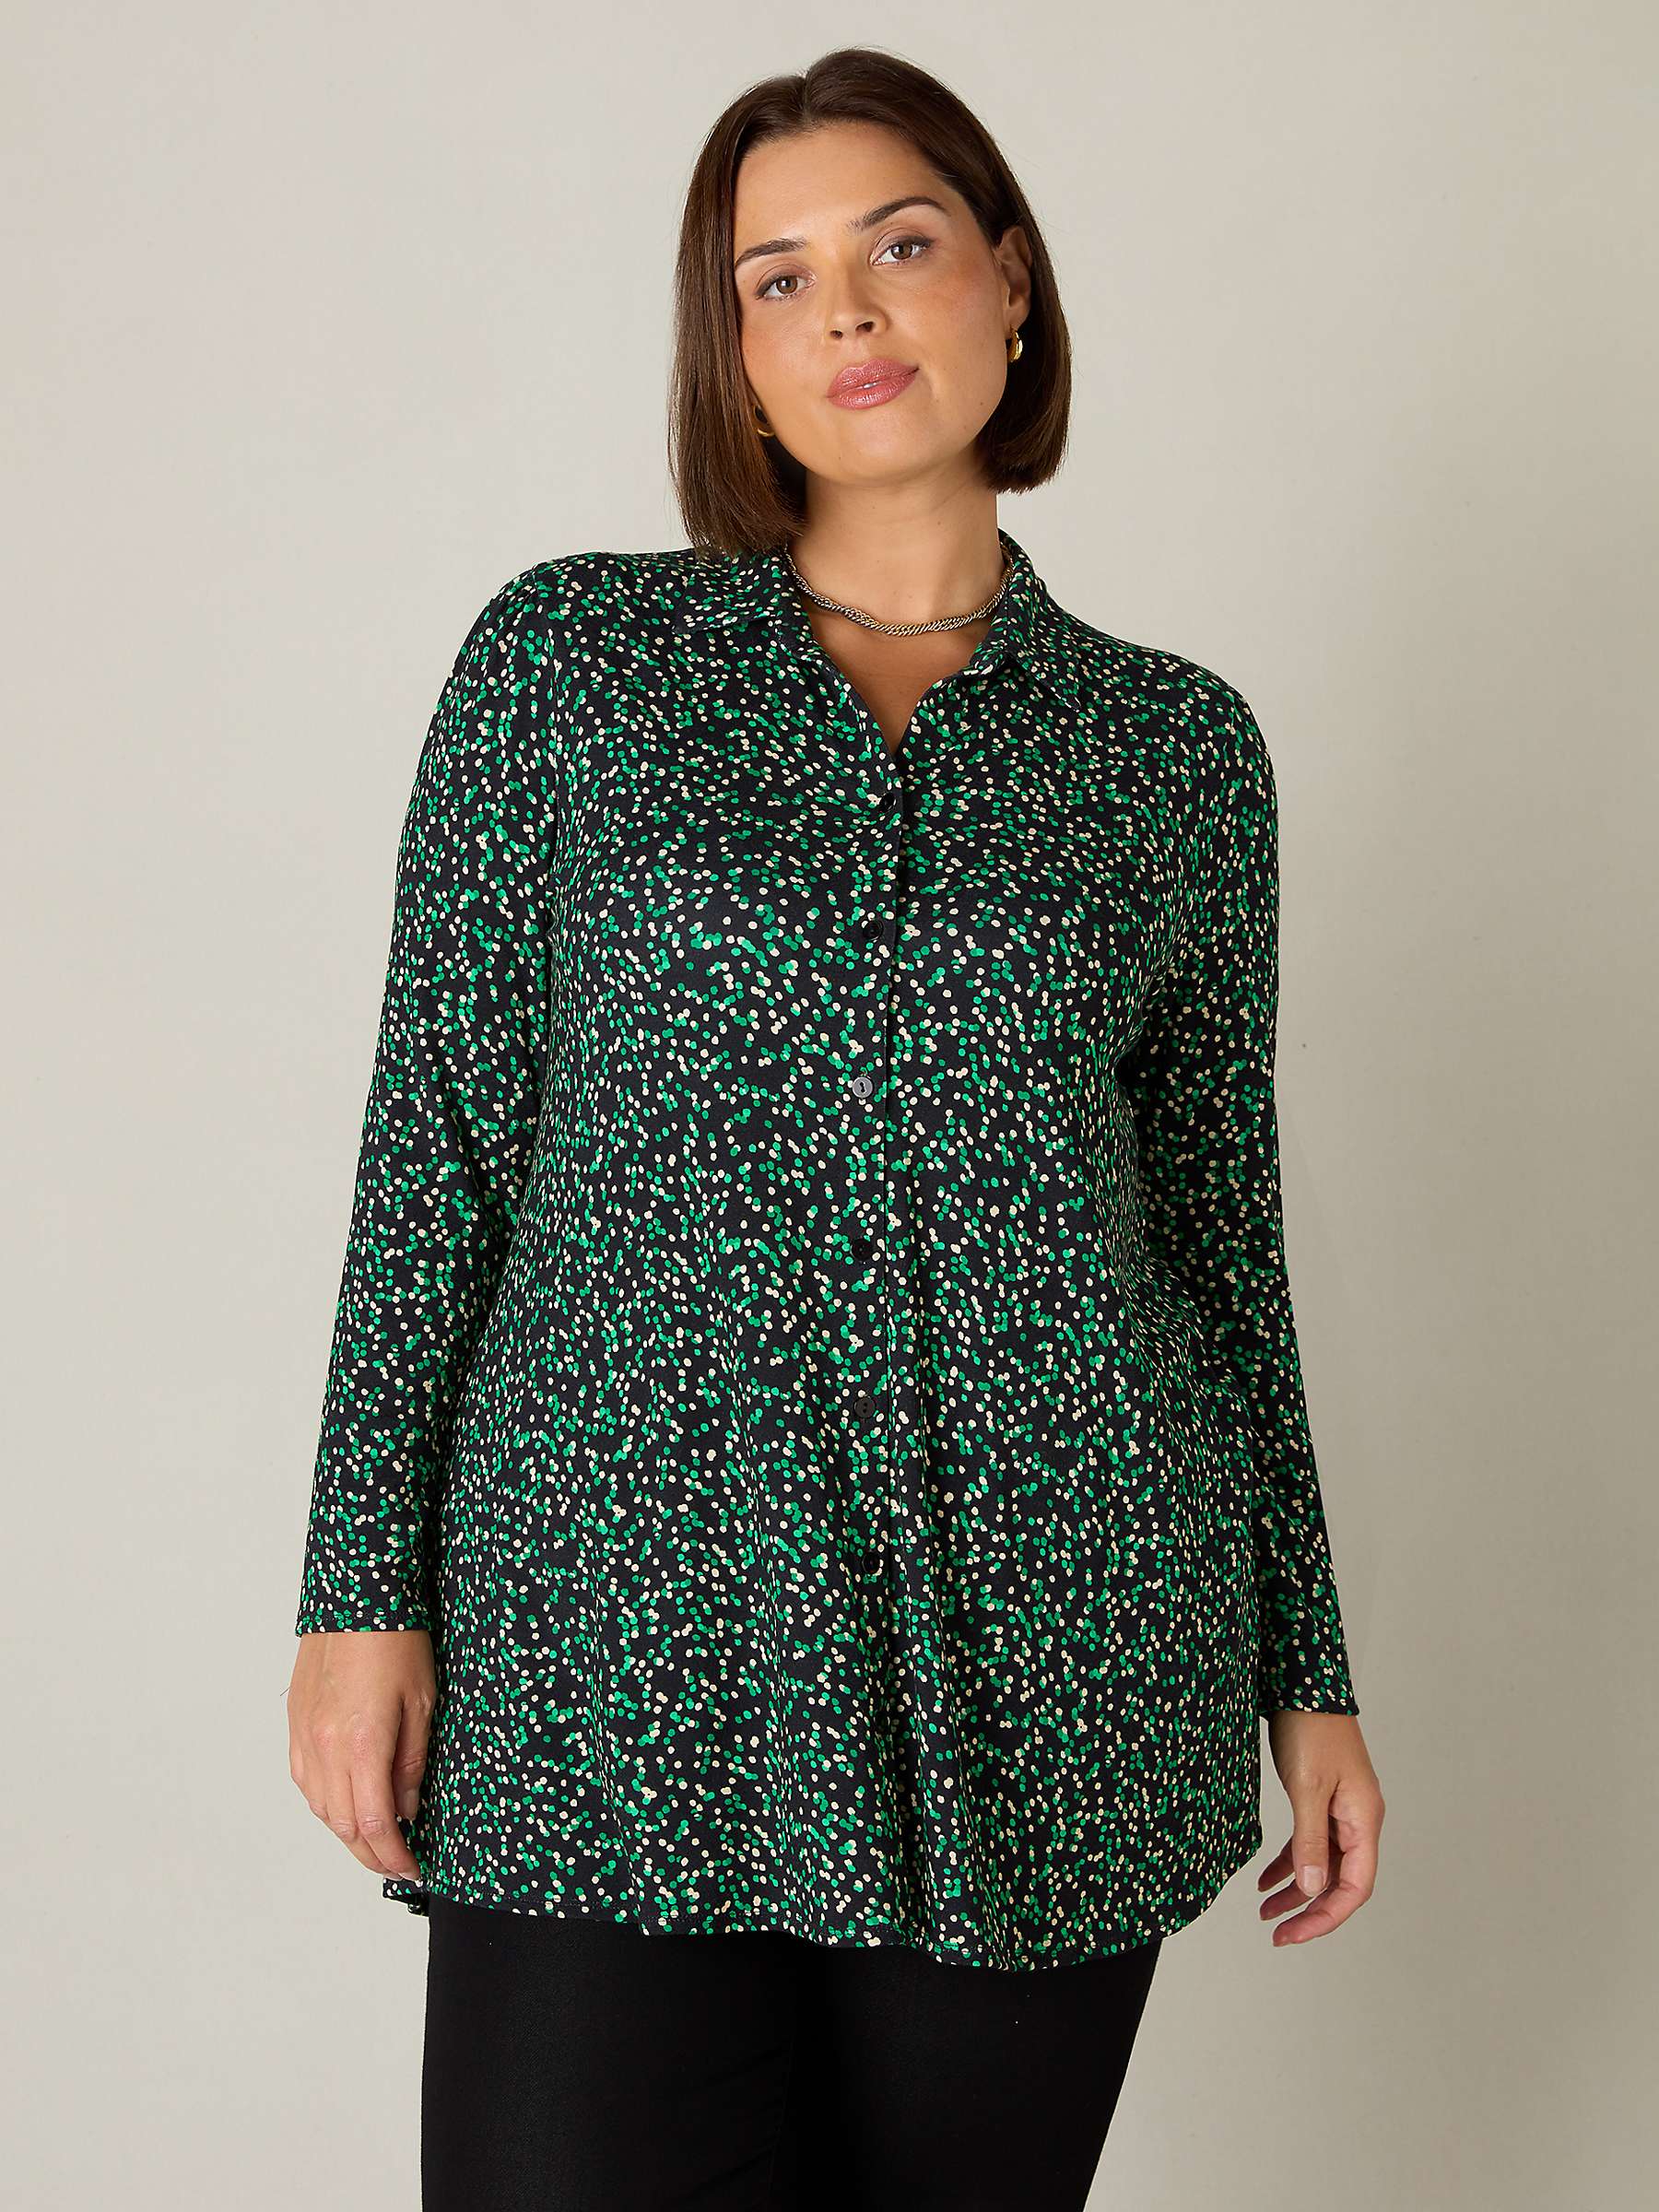 Buy Live Unlimited Curve Long Sleeve Spot Print Jersey Shirt, Green/Multi Online at johnlewis.com